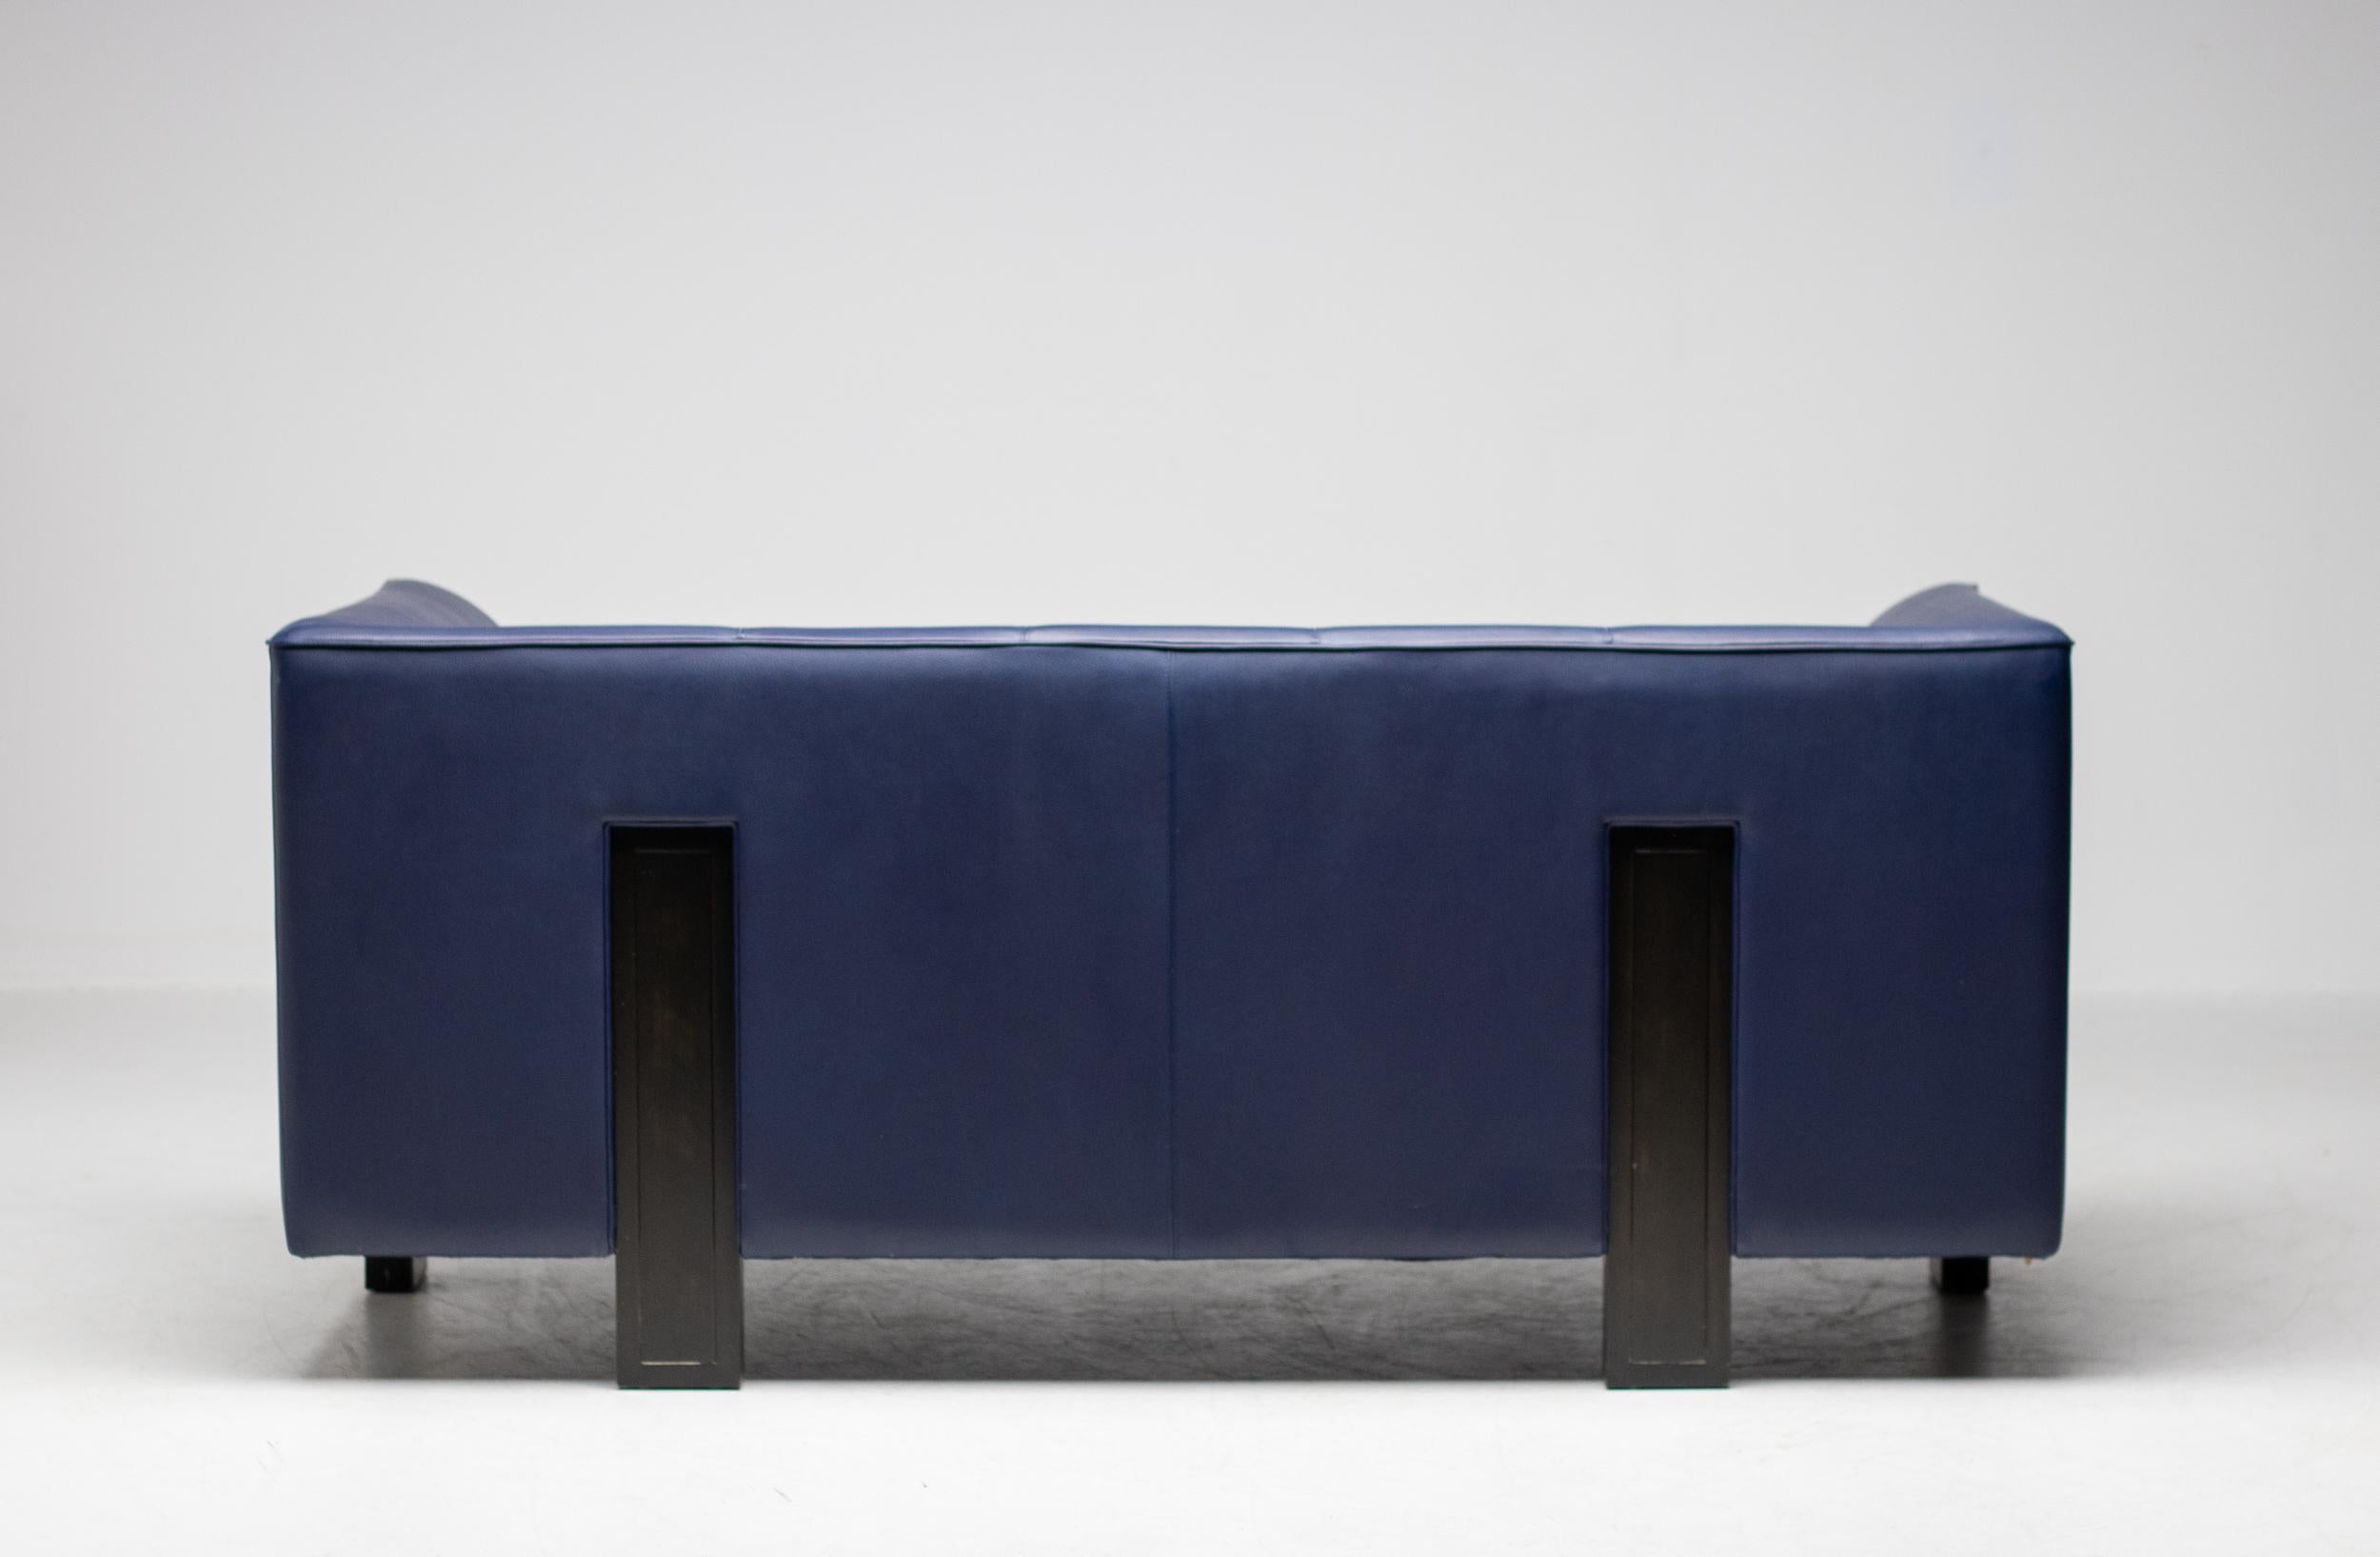 Architectural sofa designed by renown Japanese architect Shigeru Uchida.
This spectacular minimalist but very comfortable sofa with black anodized cast aluminum legs was in production for only a short while in 1995.
The full grain blue leather is in